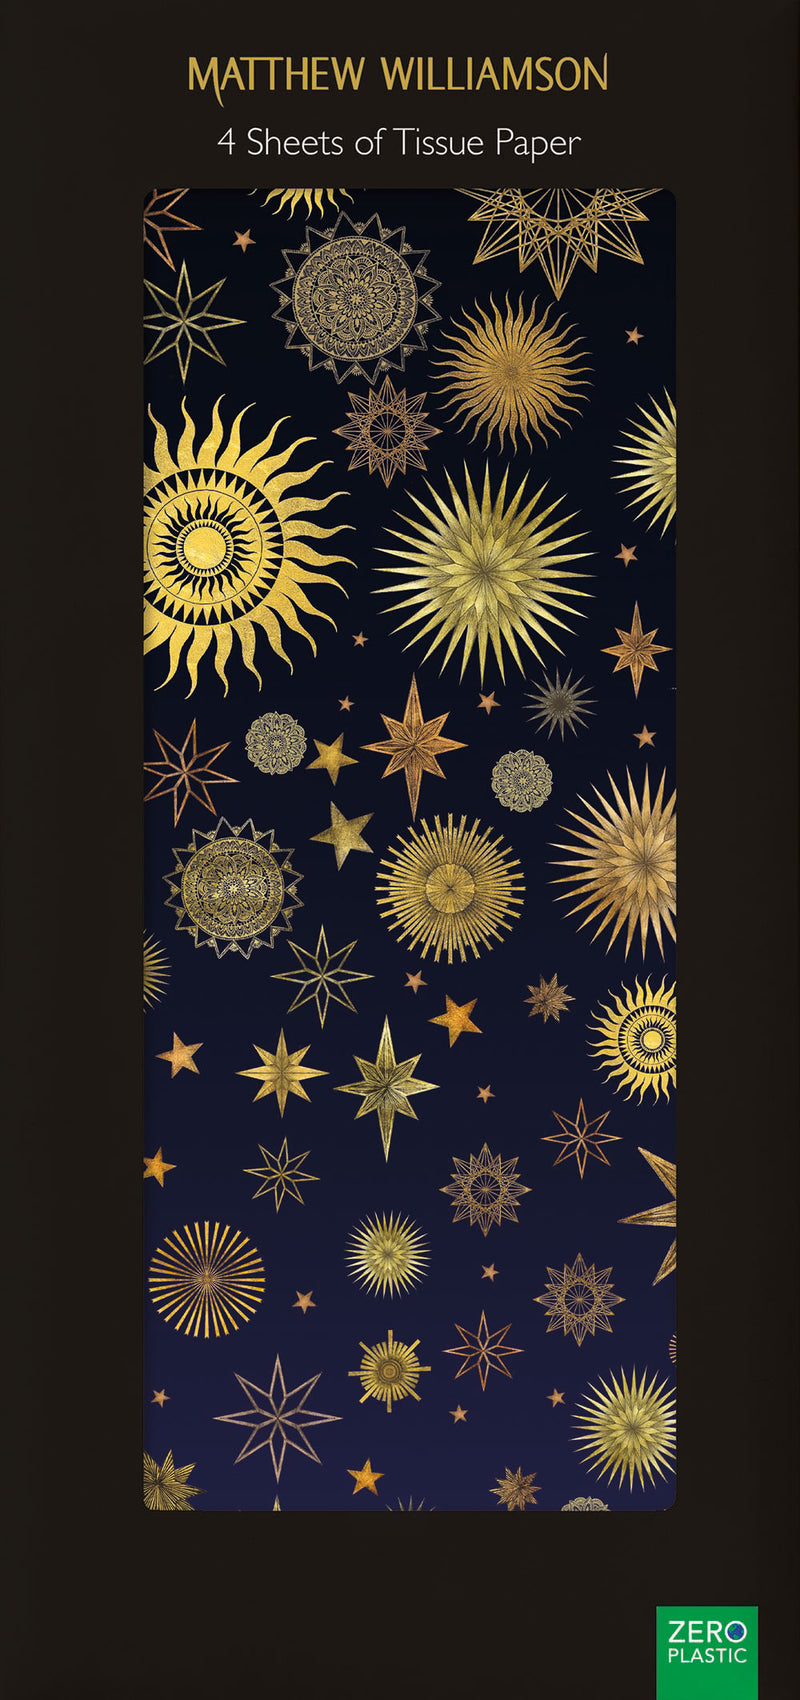 Matthew Williamson - Stardust Pack of 4 Sheets of Tissue Paper